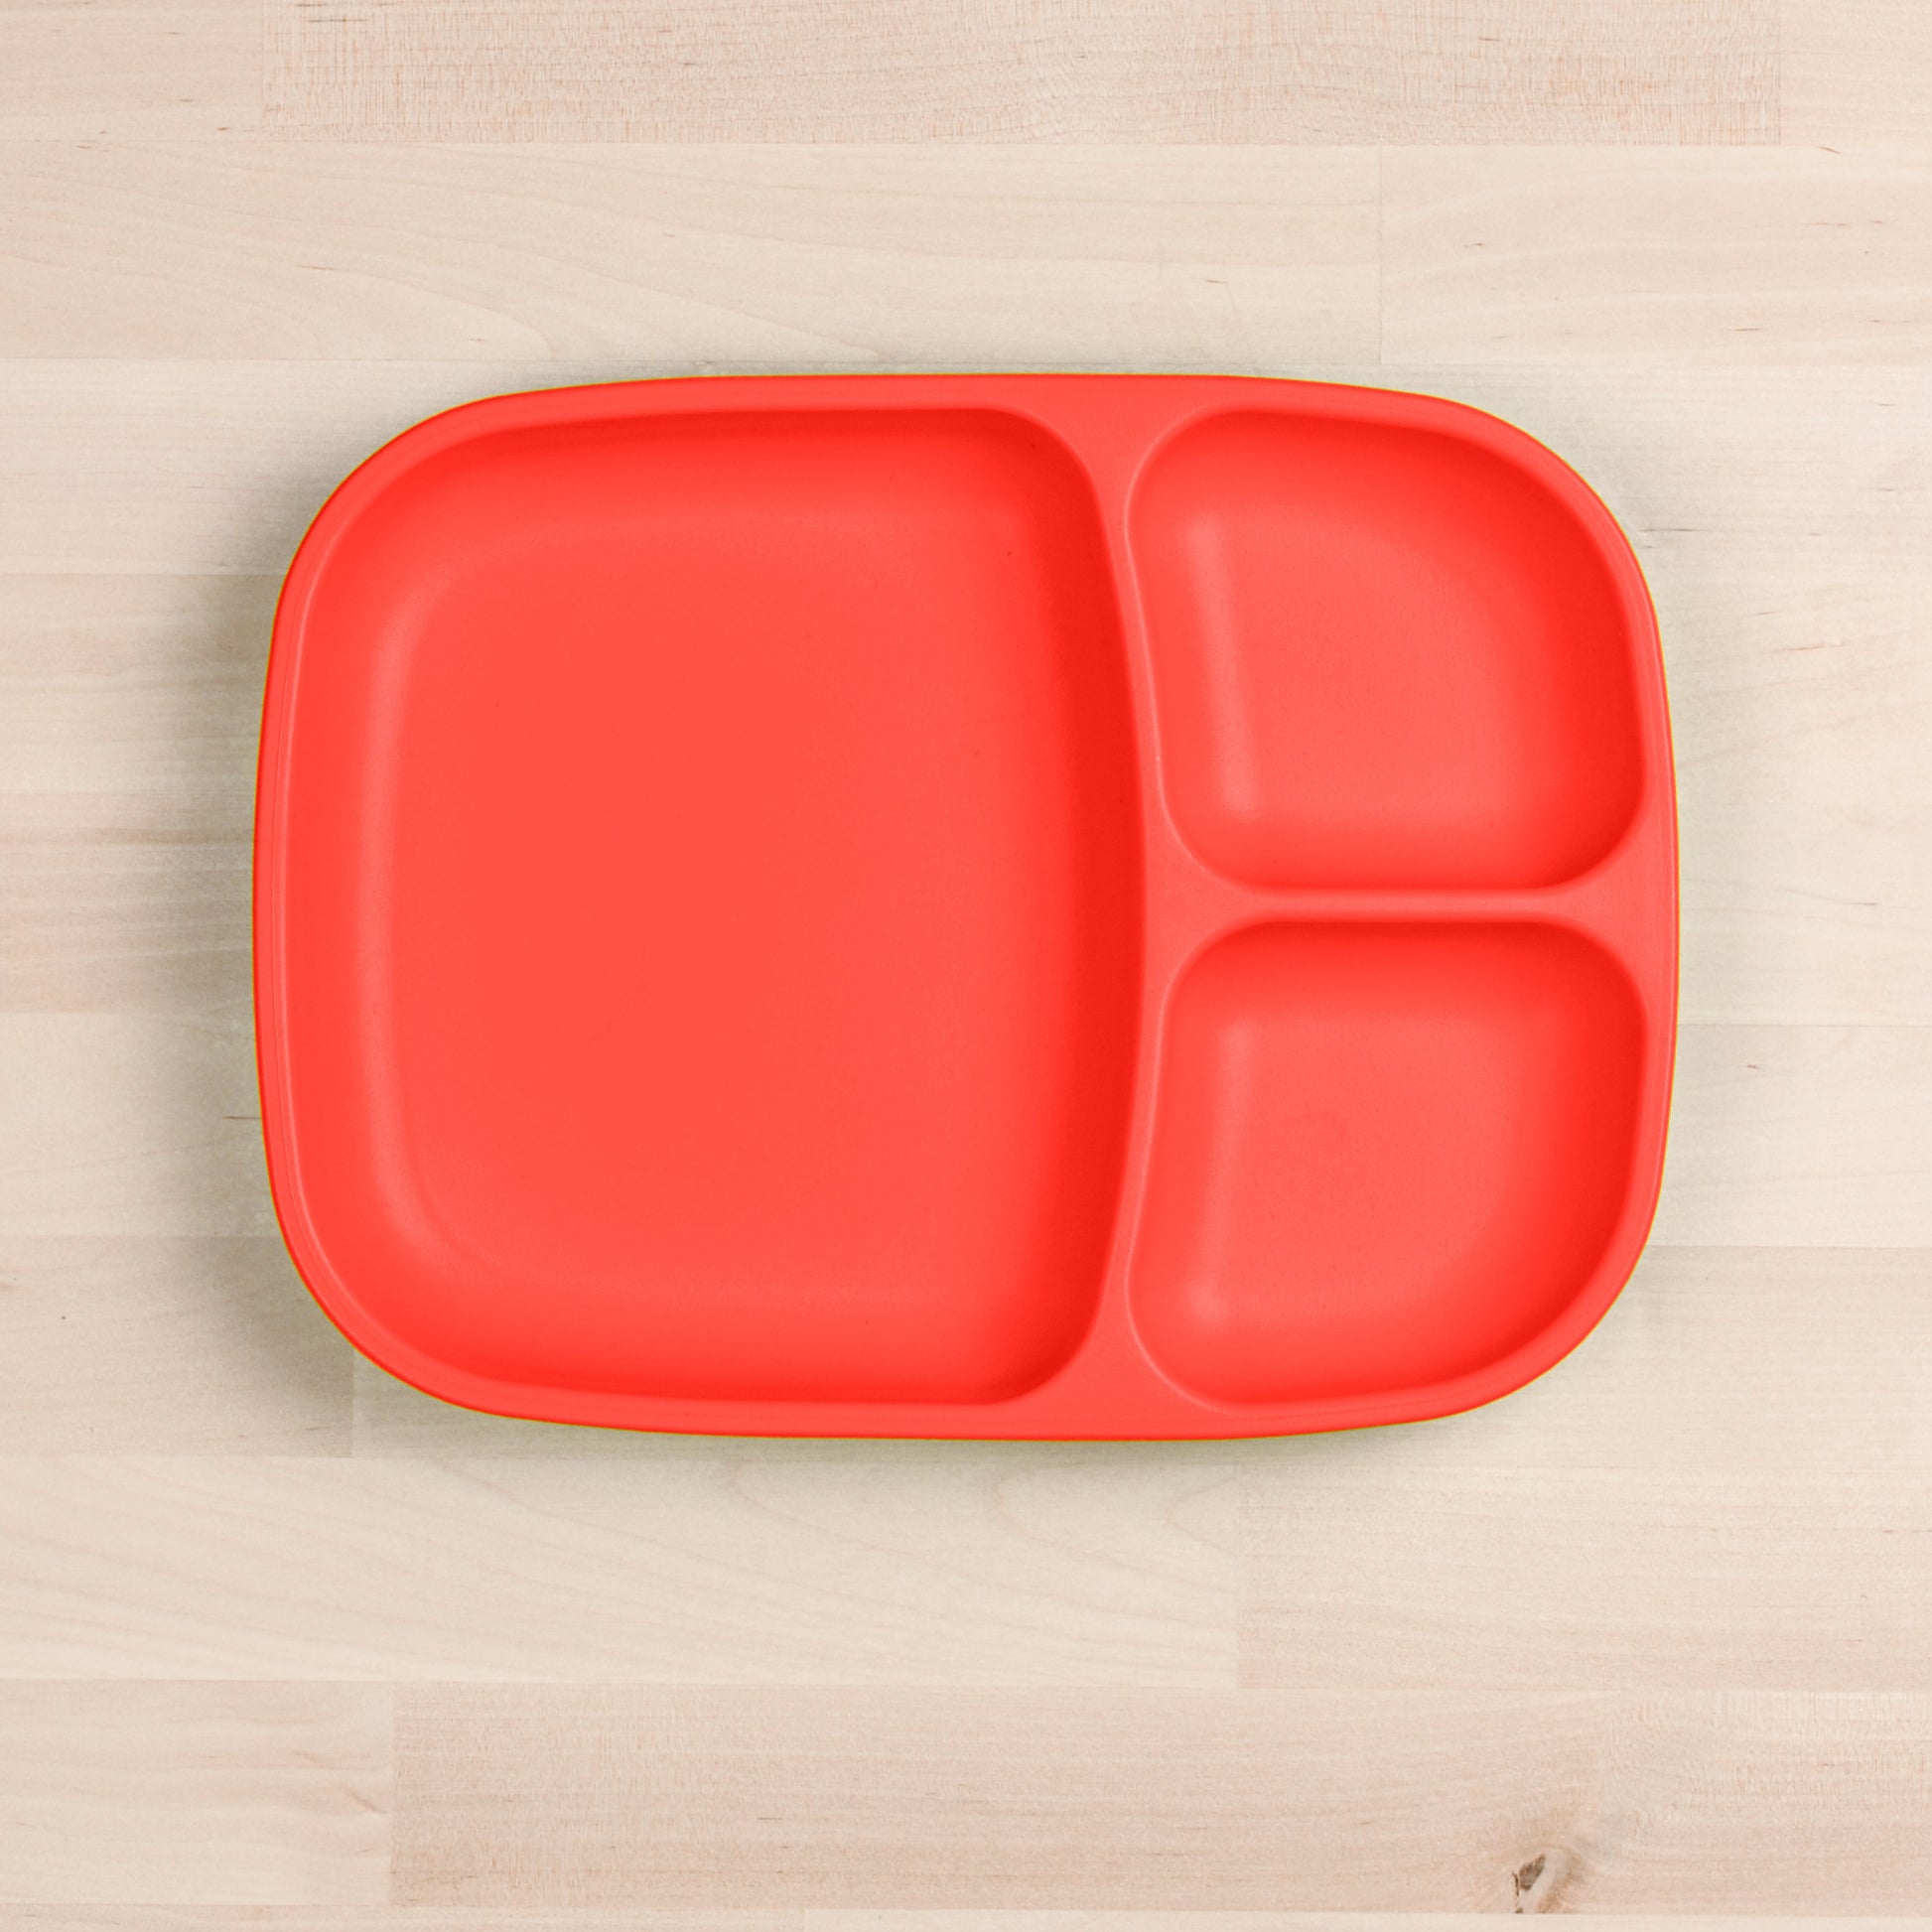 Re-Play Divided Tray in Red from Bear & Moo